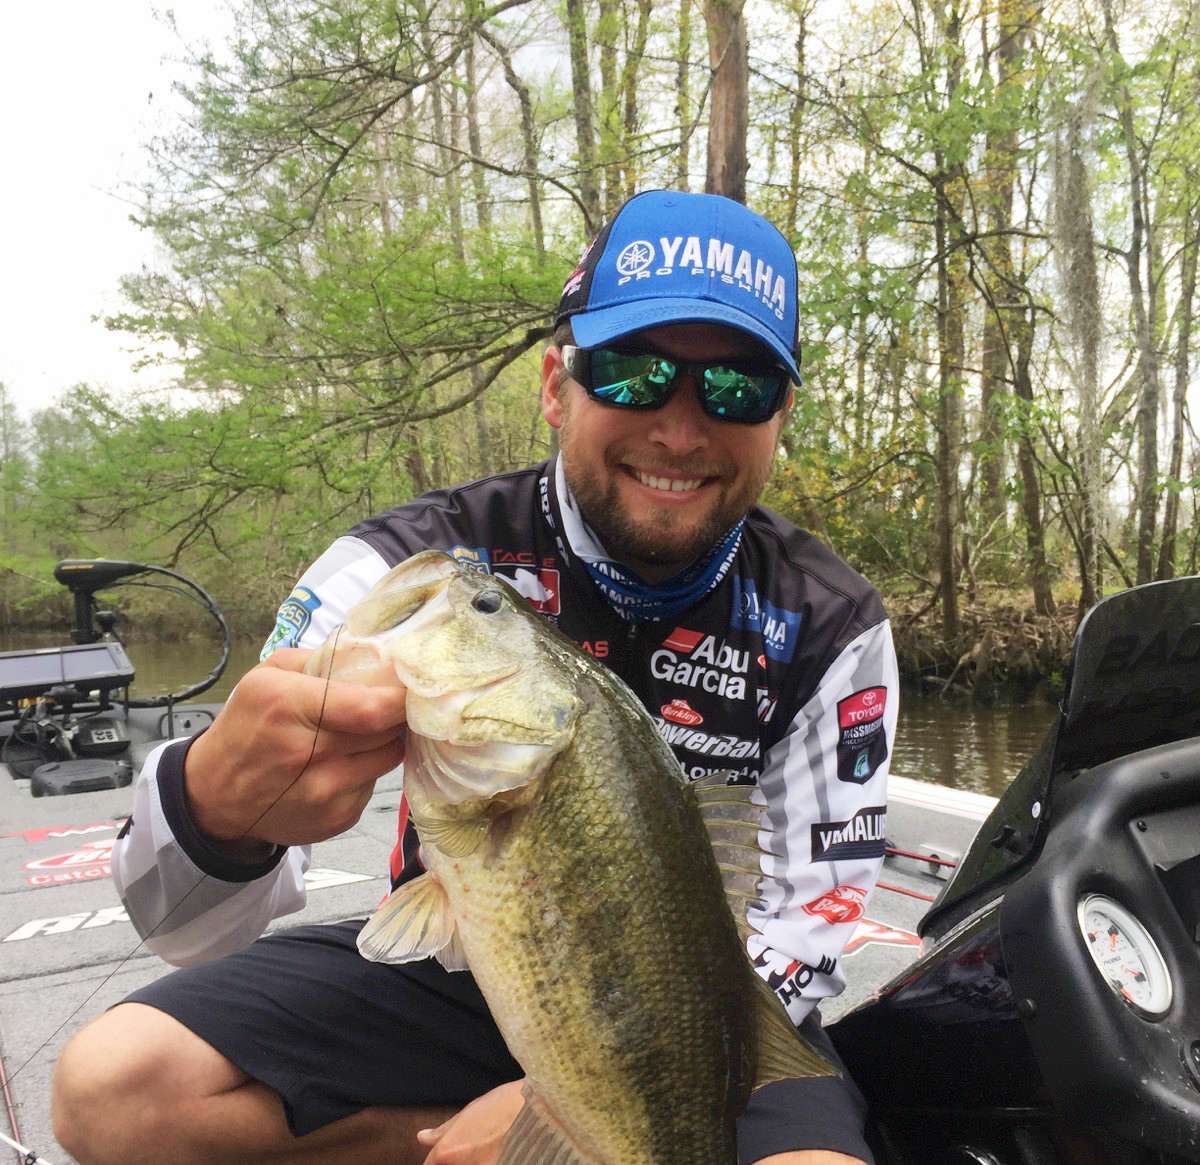 Justin Lucas with a game-changer catch.
<br>Photo by Bassmaster Marshal Mark Williams